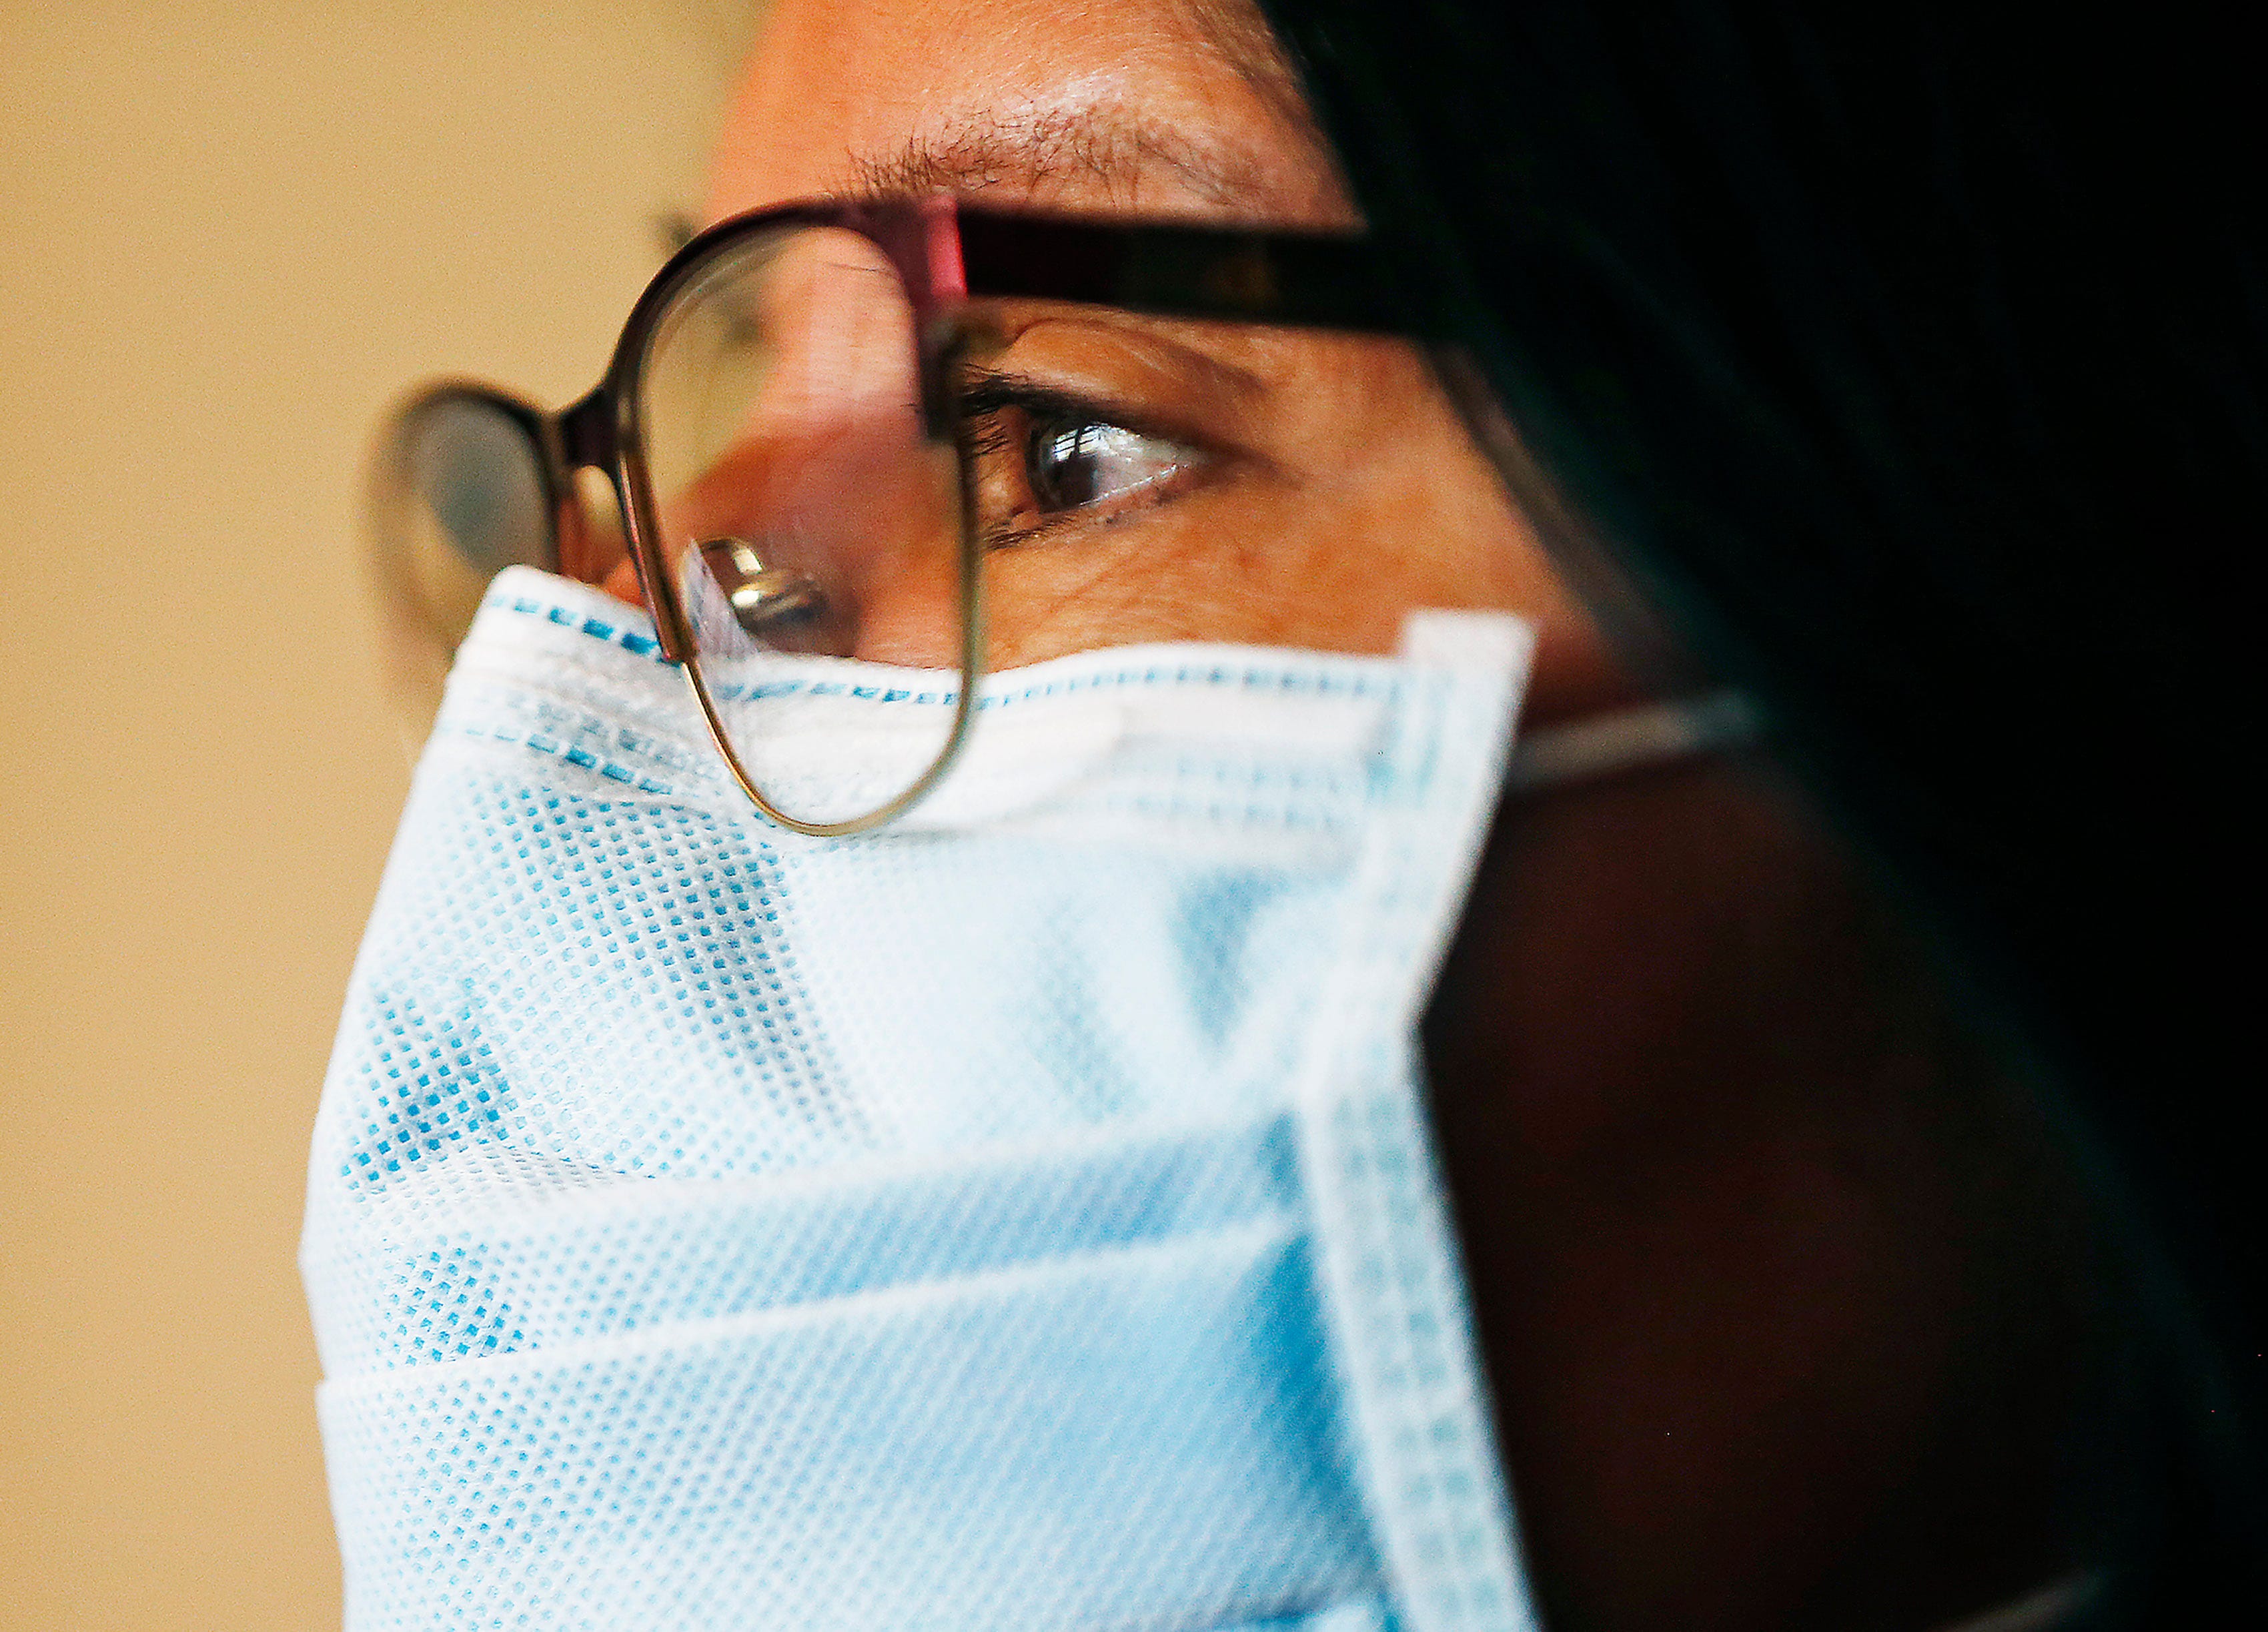 Tuba City Regional Health Care Center CEO Lynette Bonar wears a mask April 14, 2020. The hospital on Navajo Reservation in Arizona has seen a spike in COVID-19 cases. (Photo: Michael Chow/The Republic)